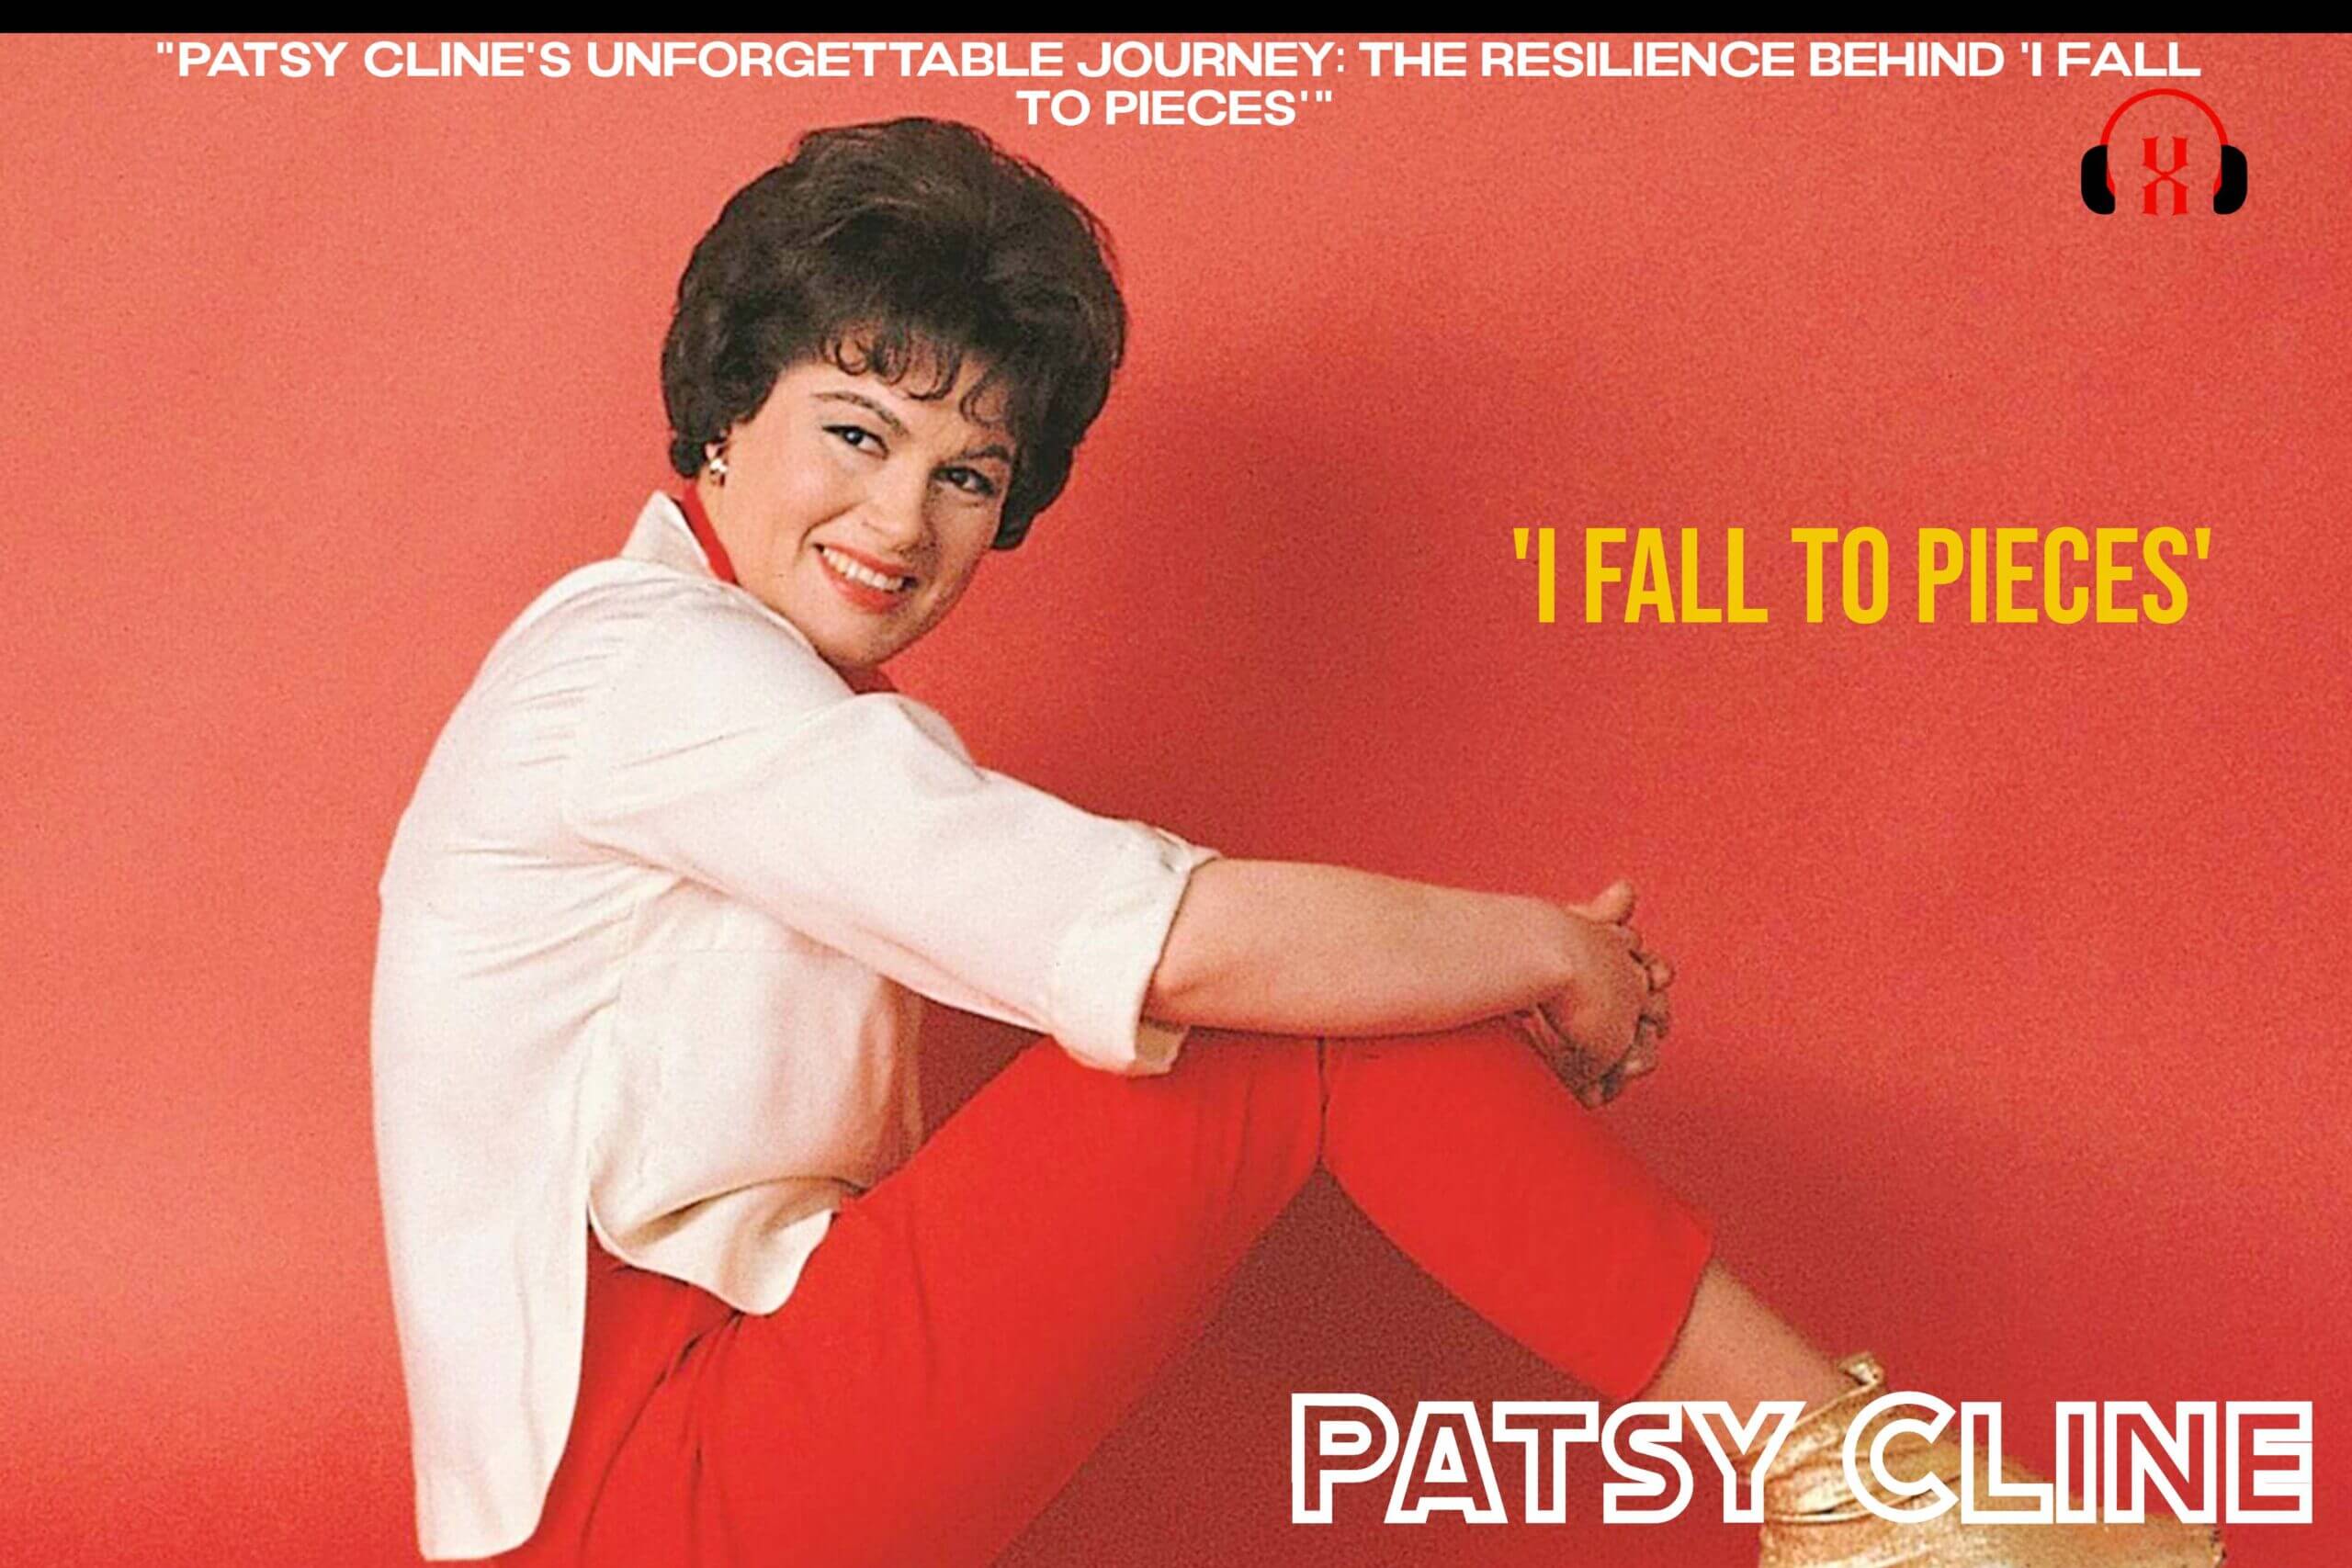 "Patsy Cline's Unforgettable Journey: The Resilience Behind 'I Fall To Pieces'"